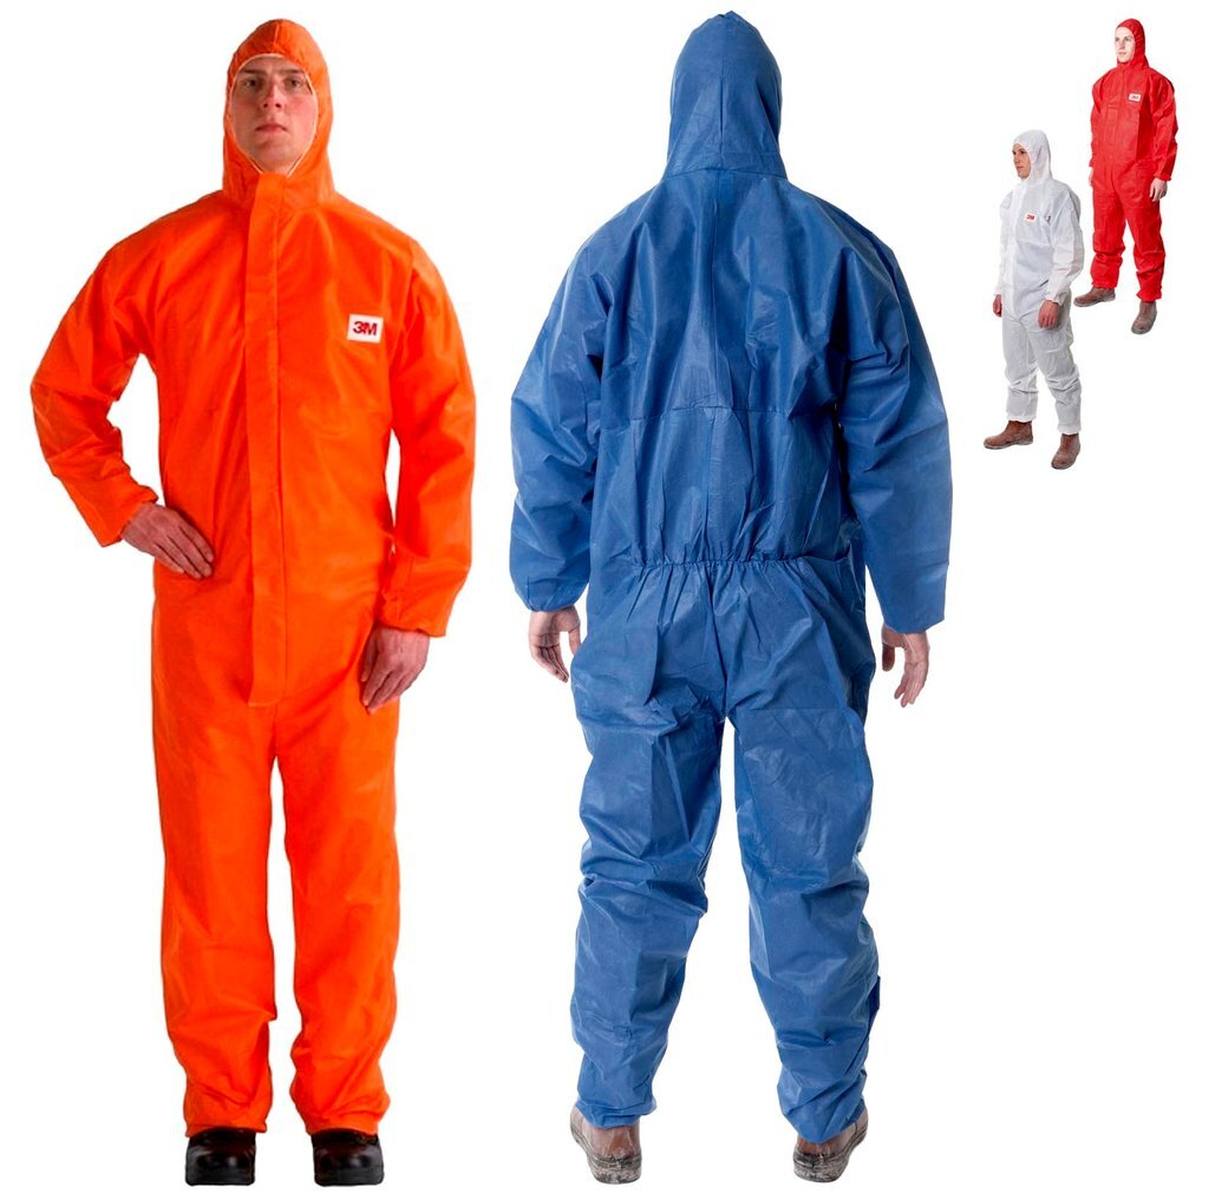 3M 4515O Protective suit, orange, TYPE 5/6, size XL, material SMMS low-lint, elasticated cuffs